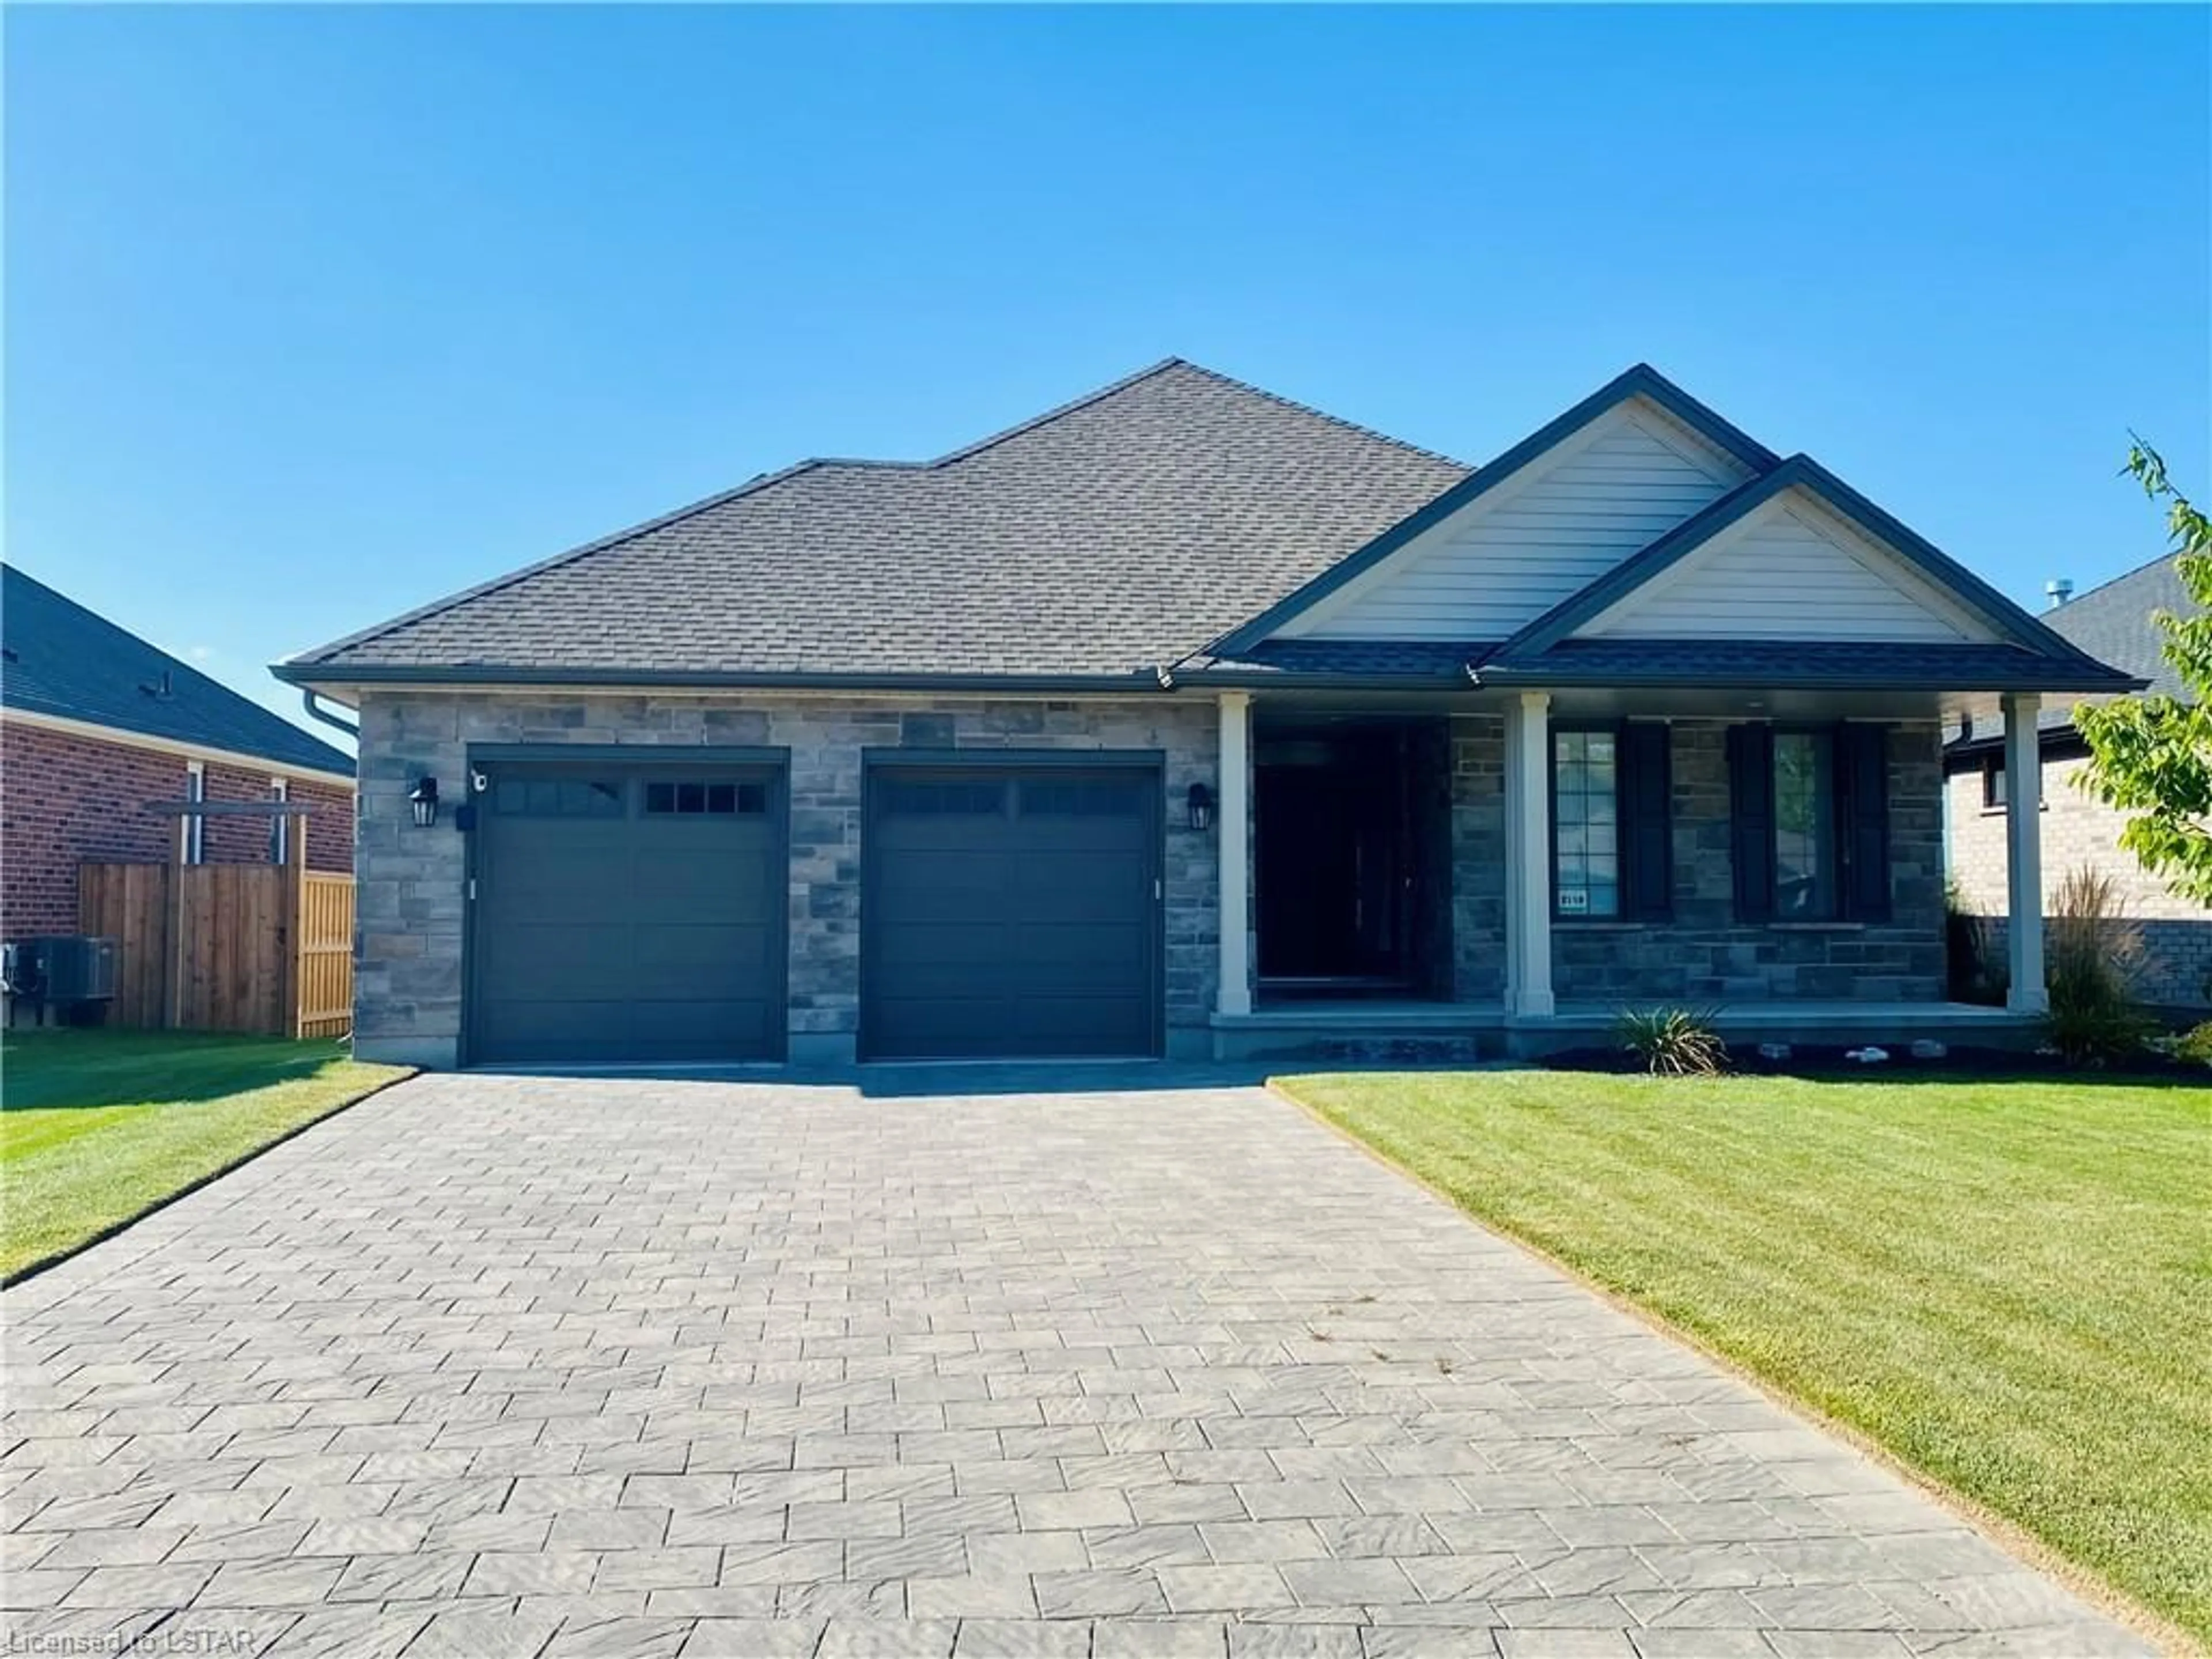 Home with brick exterior material for 2118 Lockwood Cres, Mount Brydges Ontario N0L 1W0